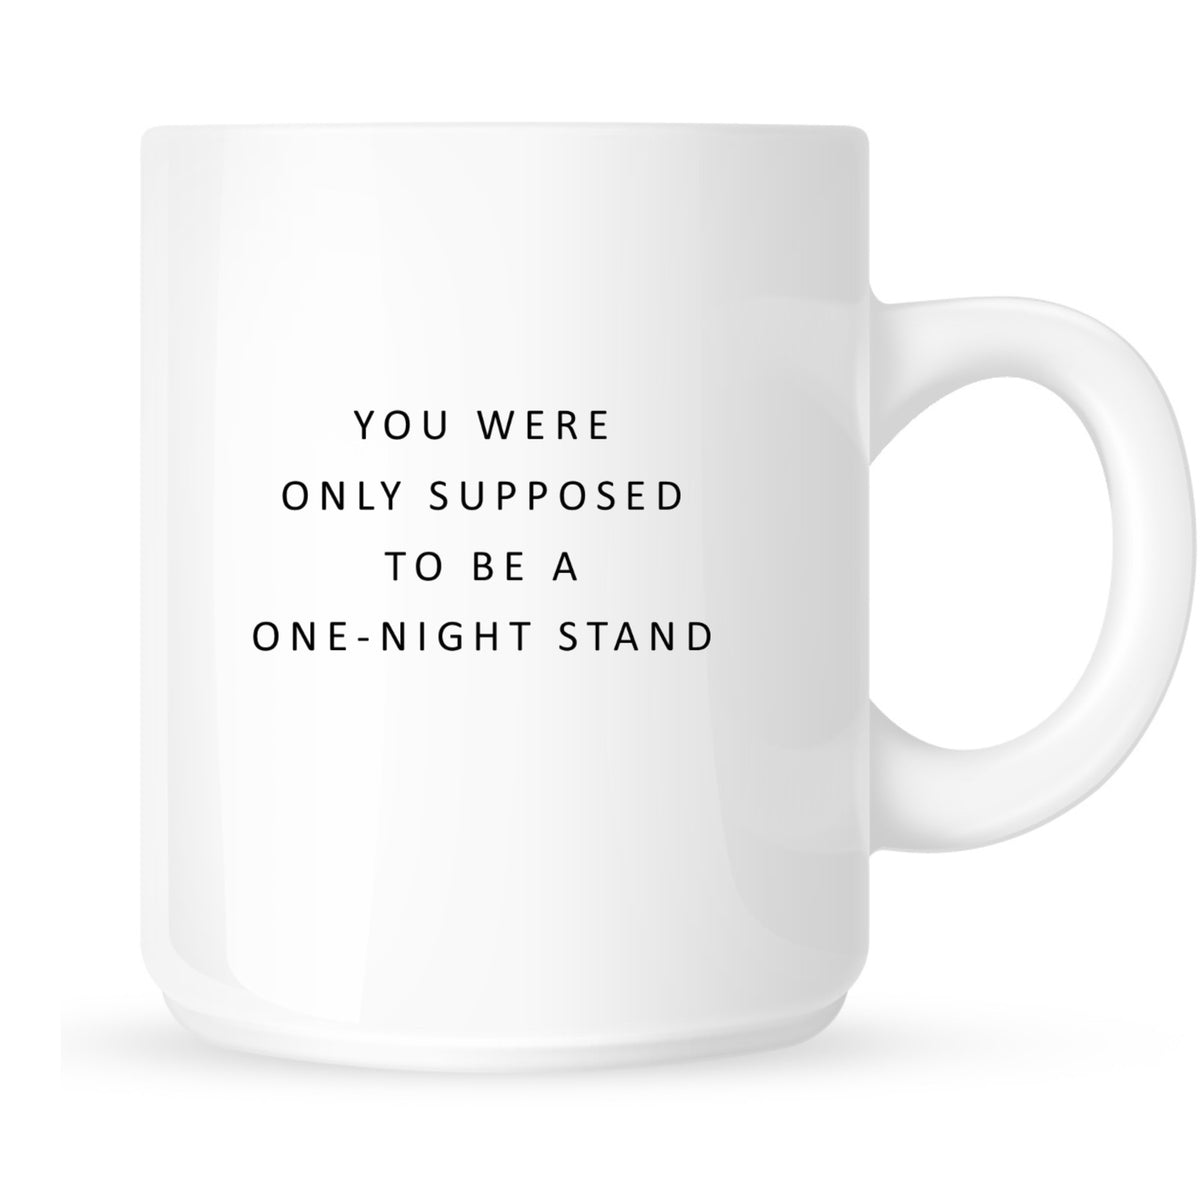 Mug - You Were Only Supposed to be a One Night Stand